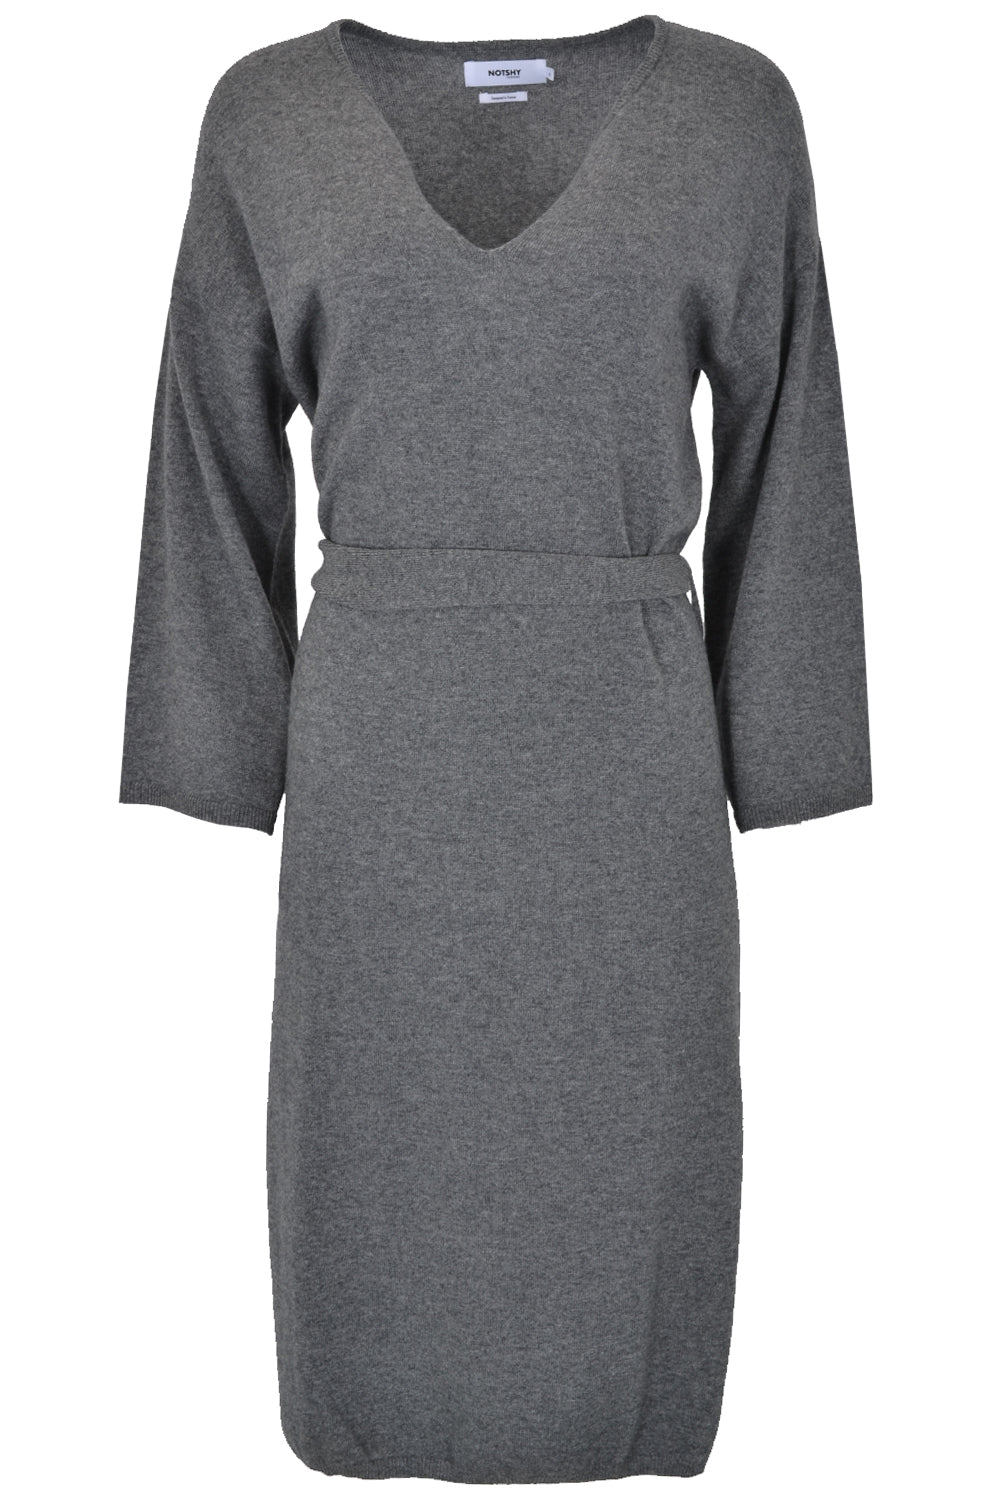 Not Shy 3703025 Grey Sweater Dress with Belt Anthracite - Sub Couture